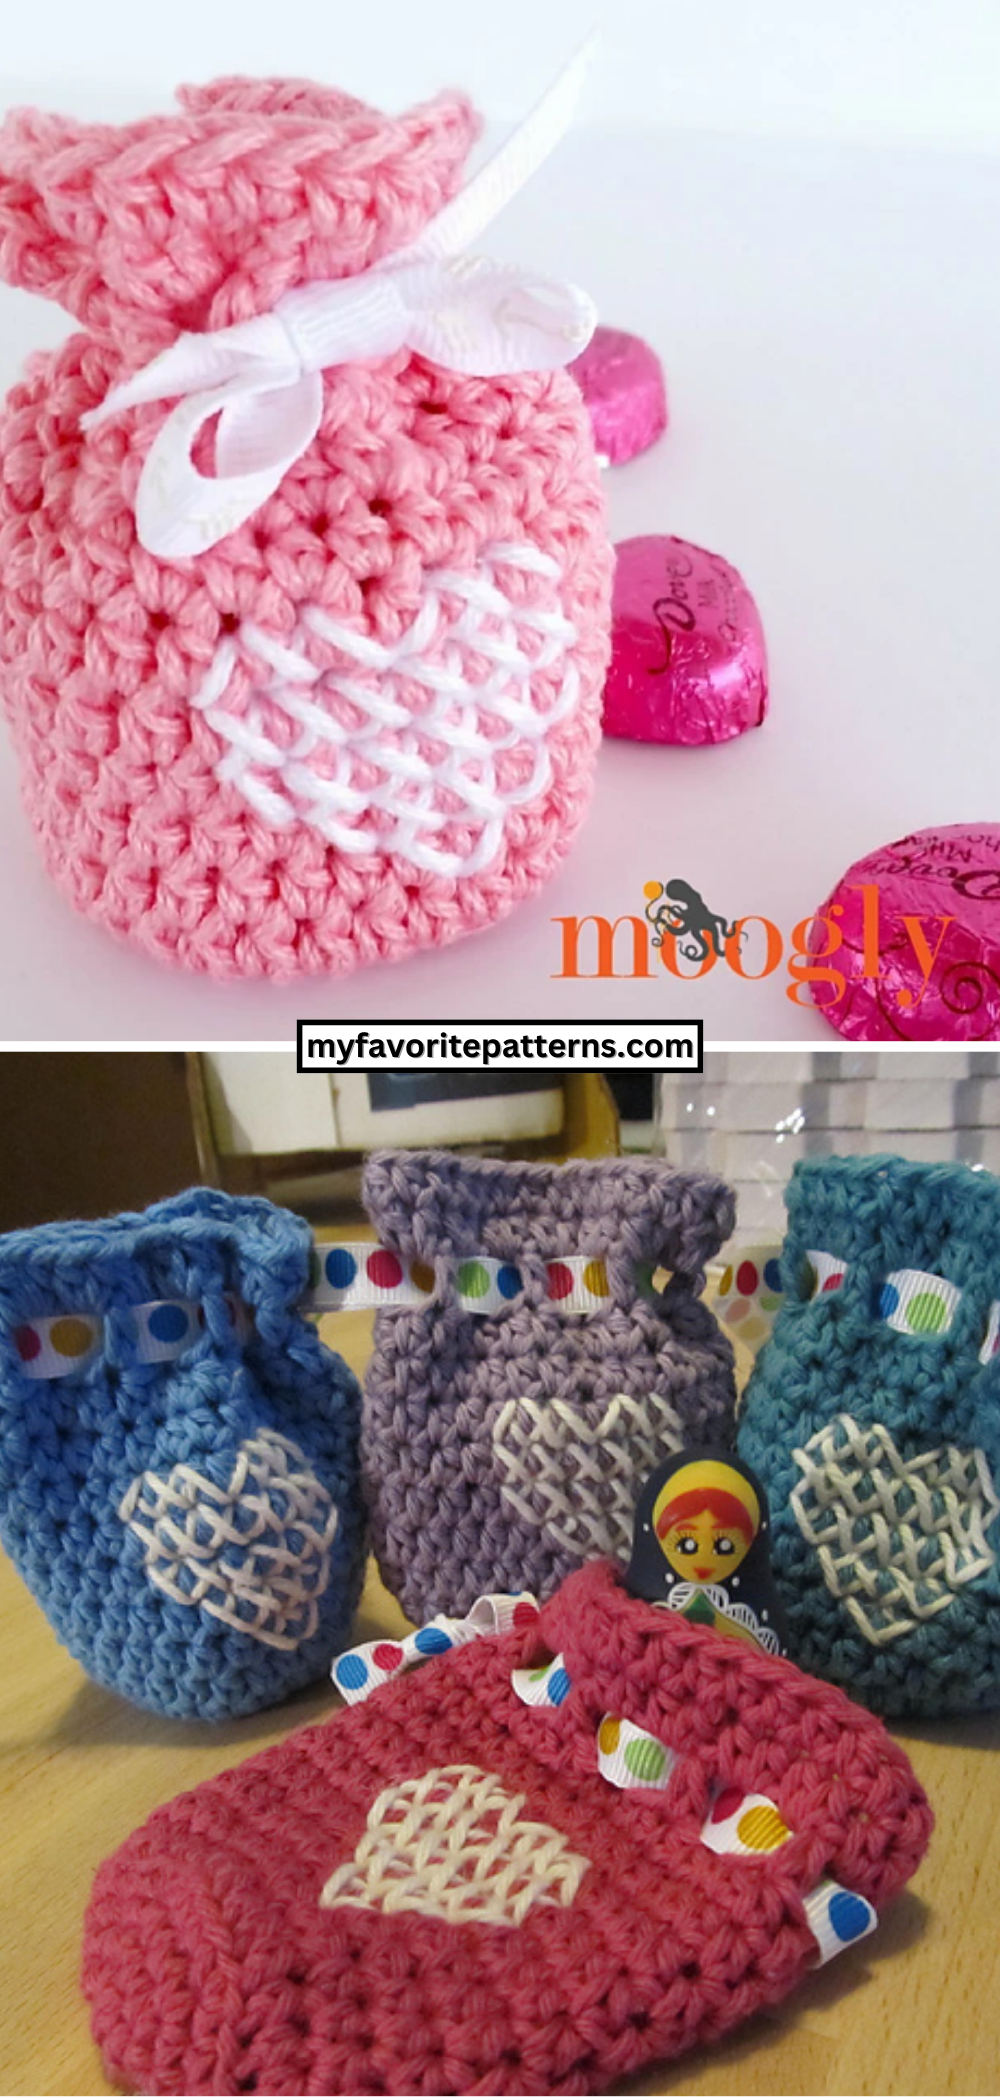 38 Free and Simple Square Crochet Patterns - Ideal Me